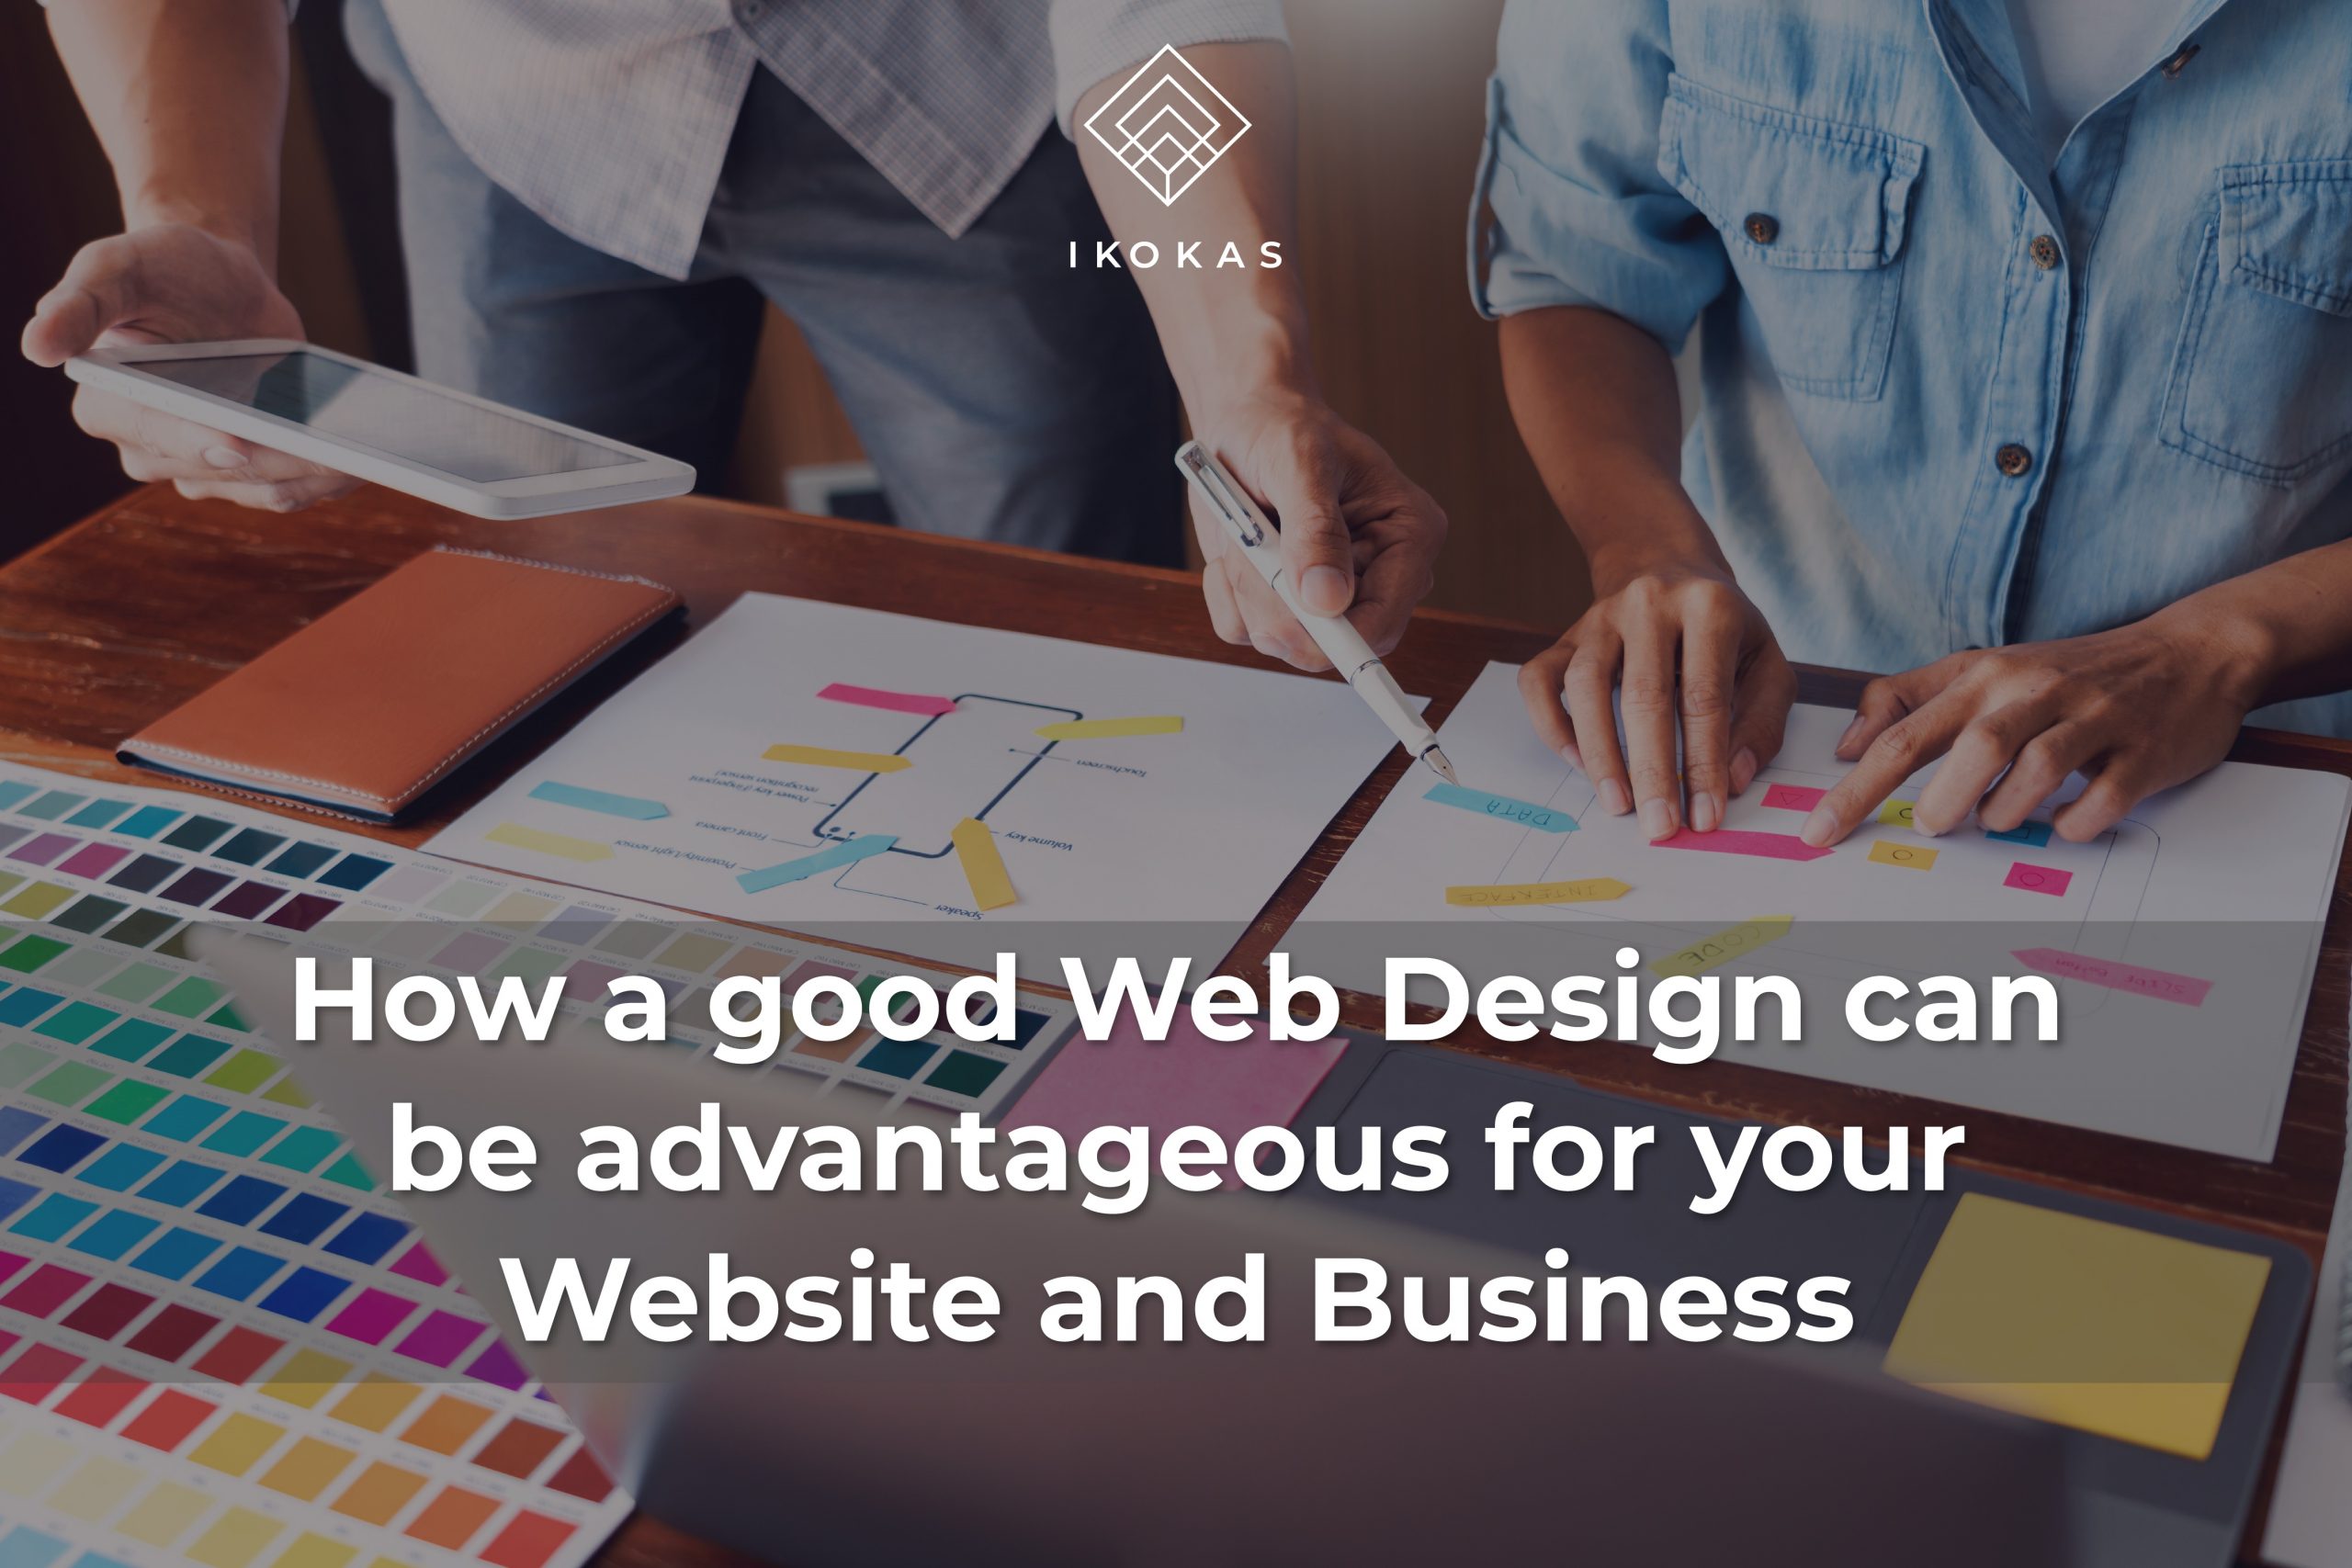 How Good Web Design can be Advantageous for your Website and Business